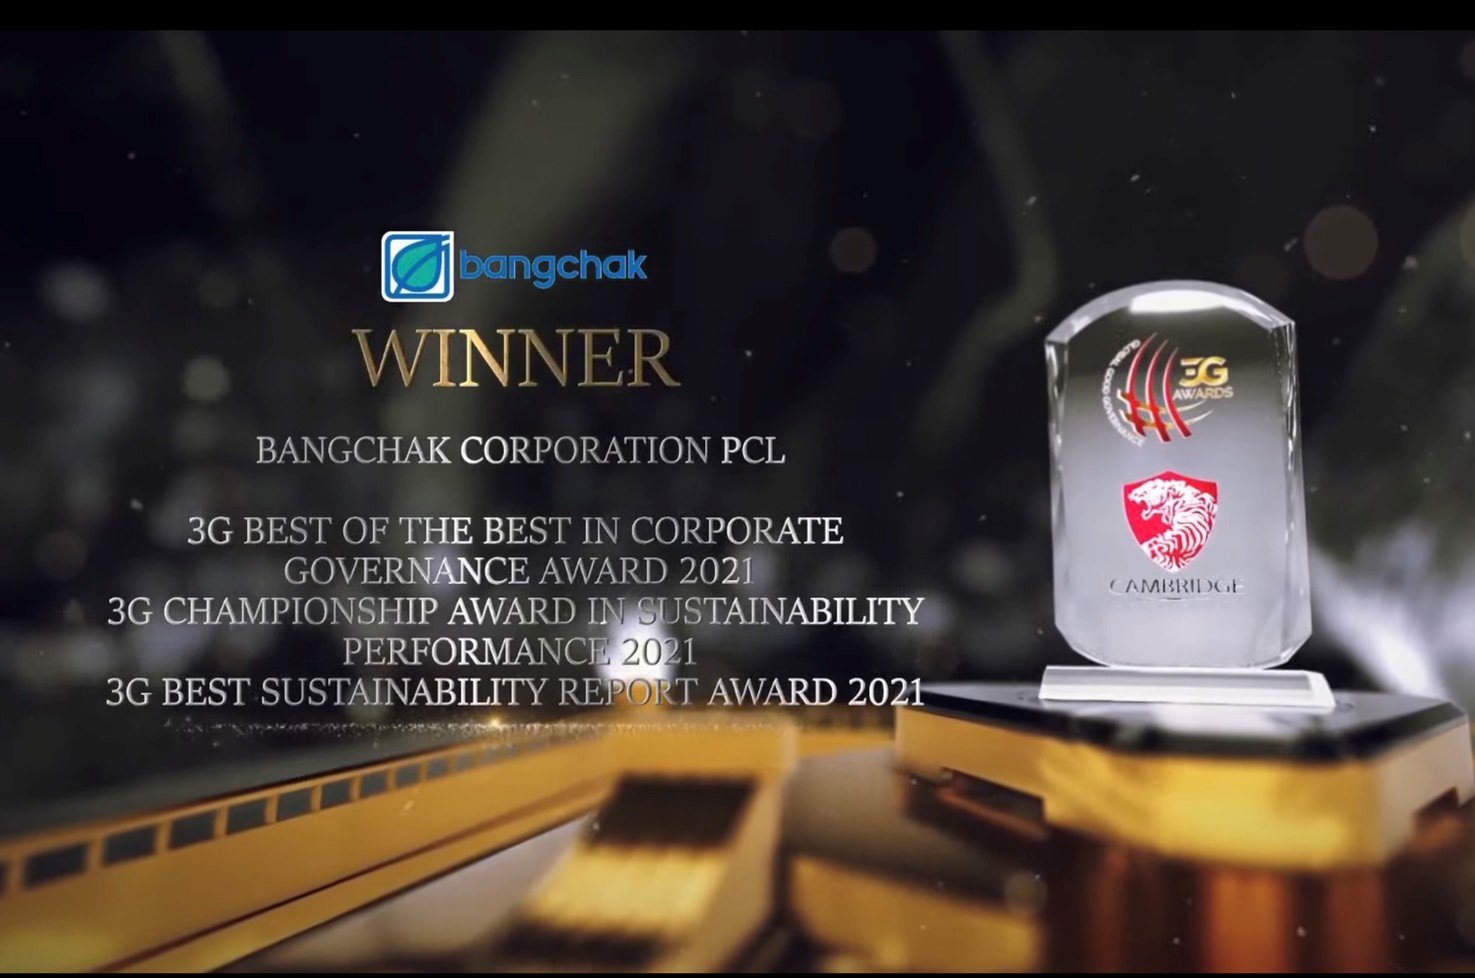 Bangchak wins 3G Awards for the 4th consecutive year for excellence in corporate governance and sustainability